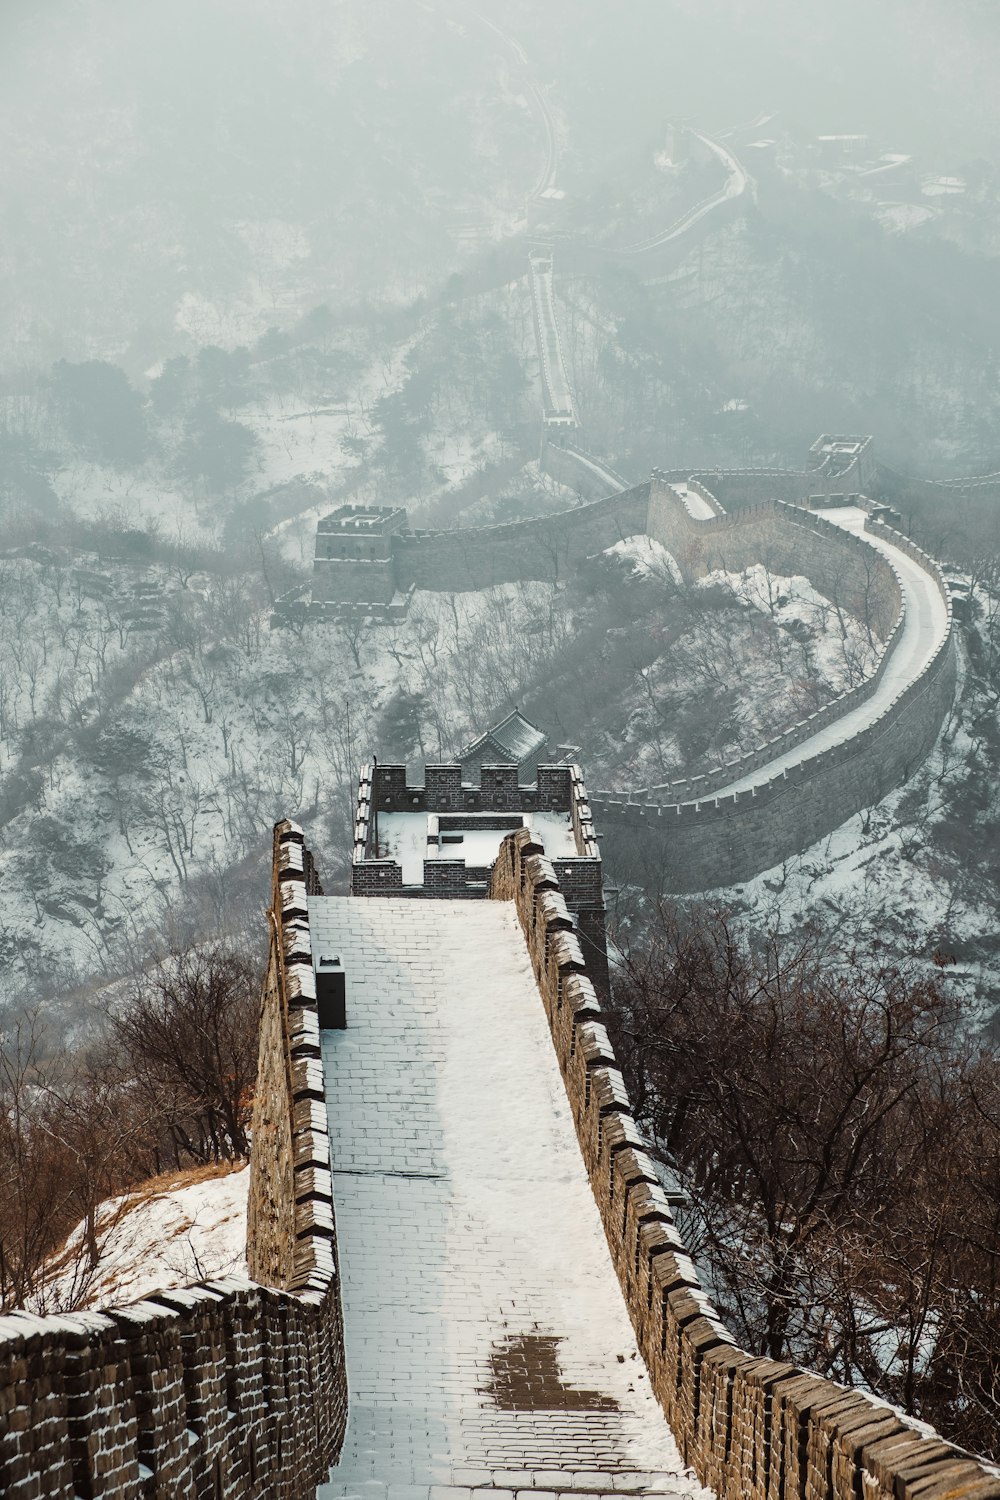 The Great wall of China covered with snow